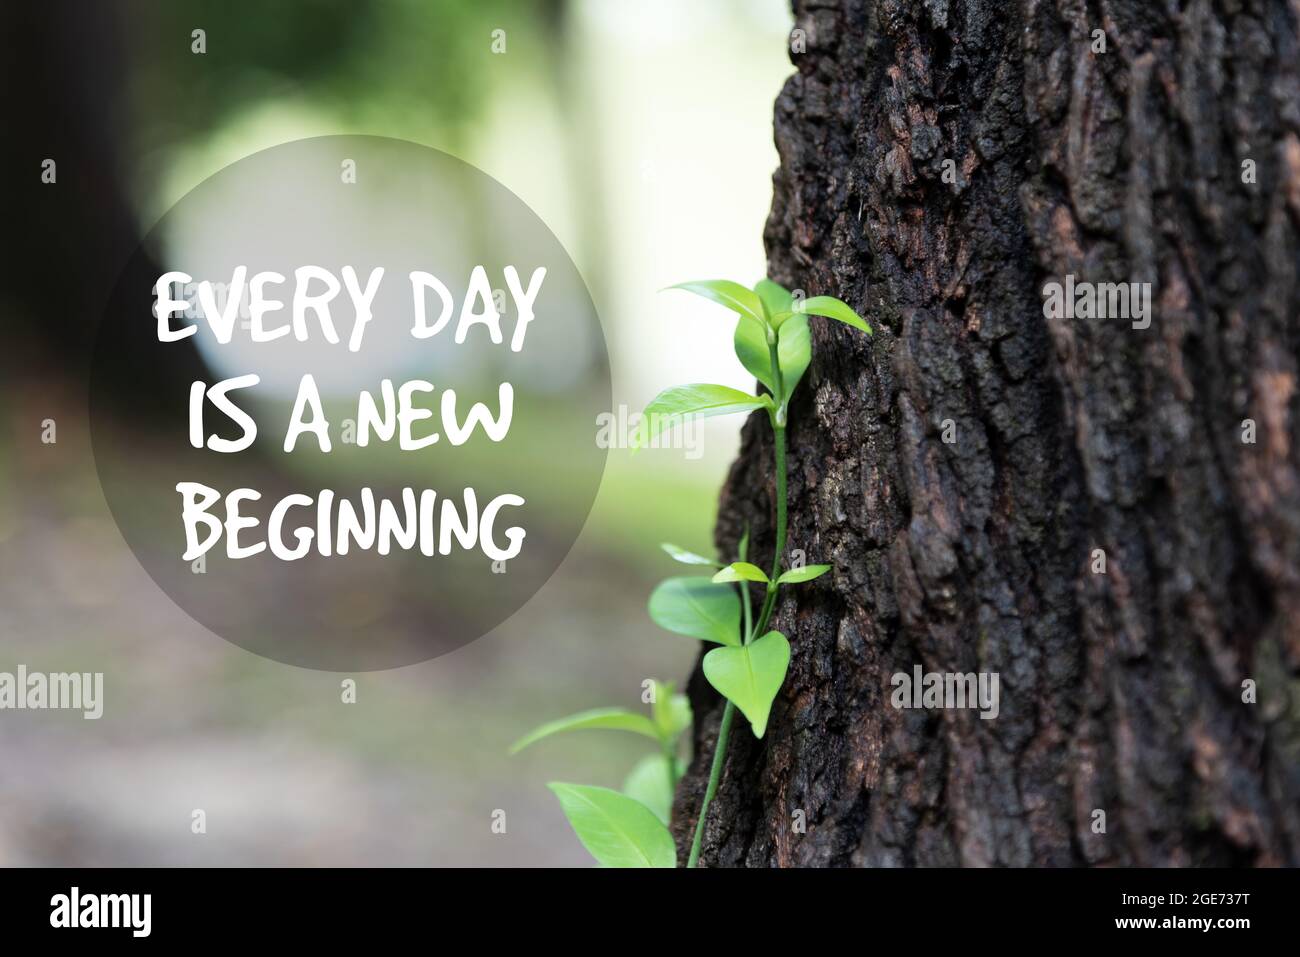 Life Inspirational Quotes - Everyday is a new beginning - Nature background Stock Photo